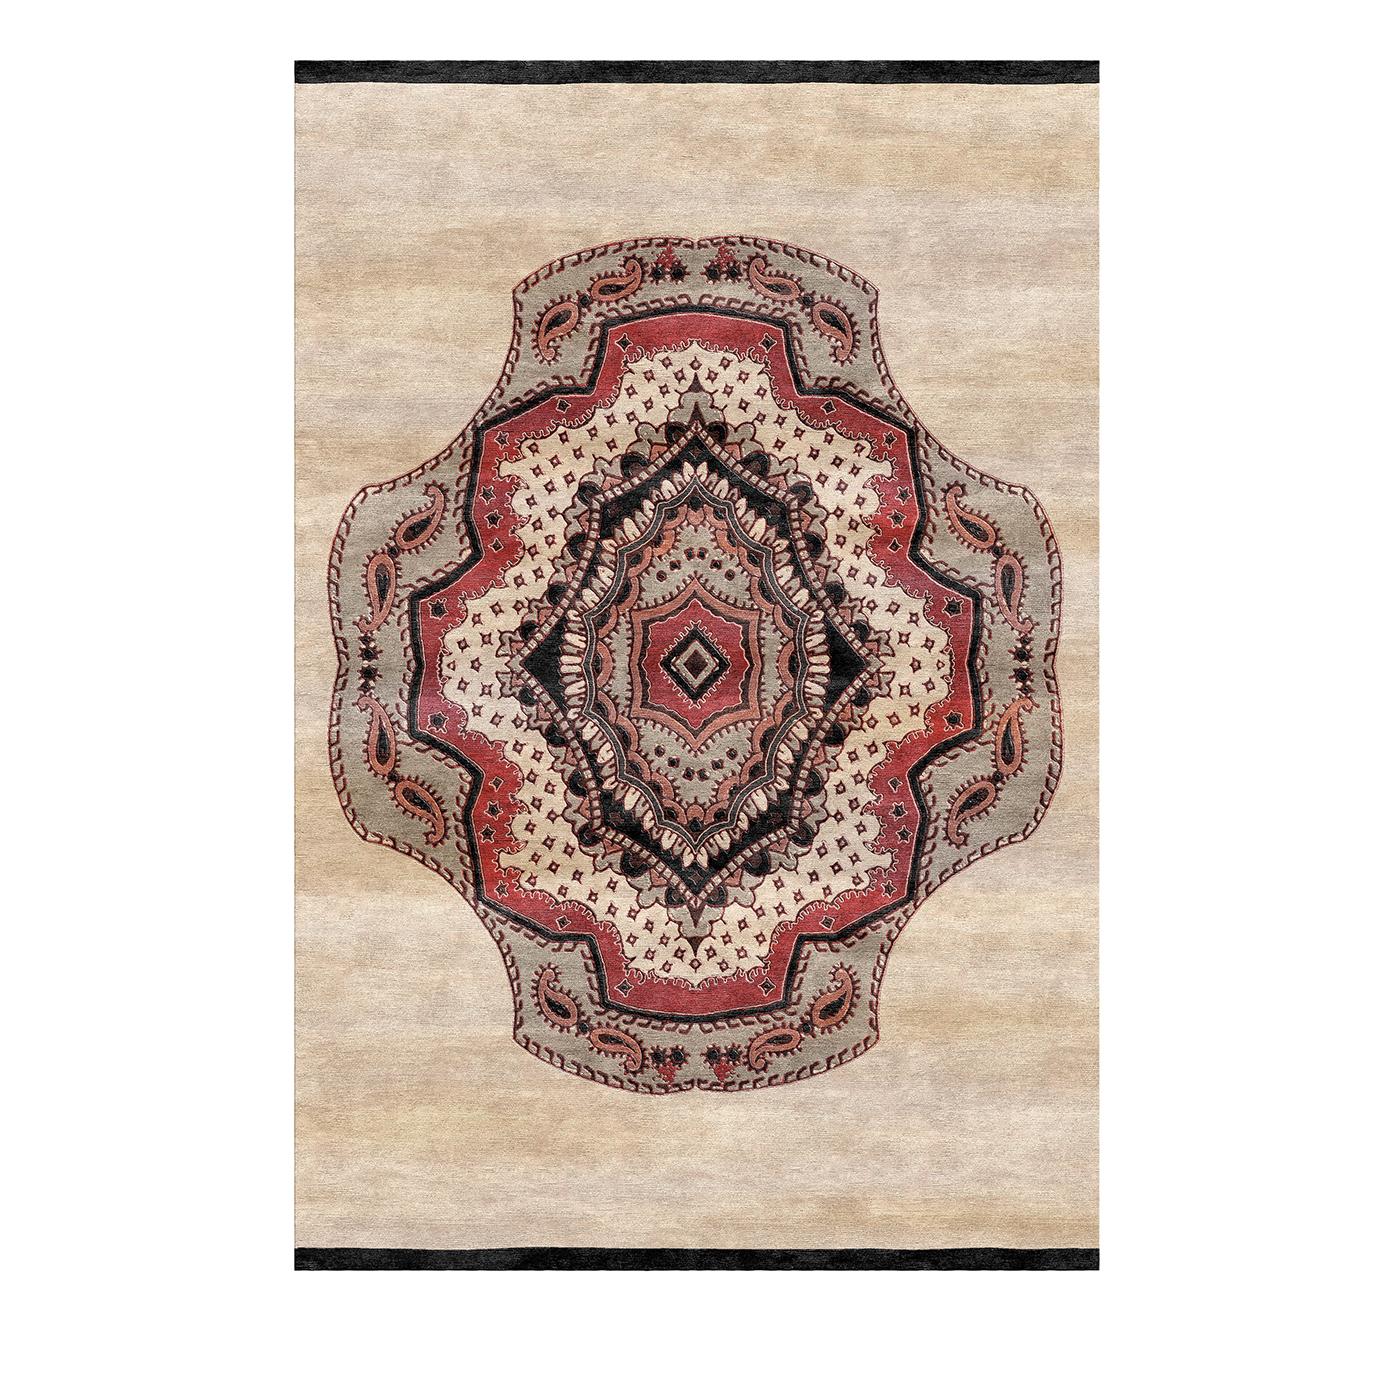 Distinguished for its creativity and mystical allure, this exceptional rug exemplifies Malcusa's artistic vision. Made of hand knotted wool and bamboo fibers by Tibetan craftsmen, the rug's remarkable mandala design has fourteen concentric rings: